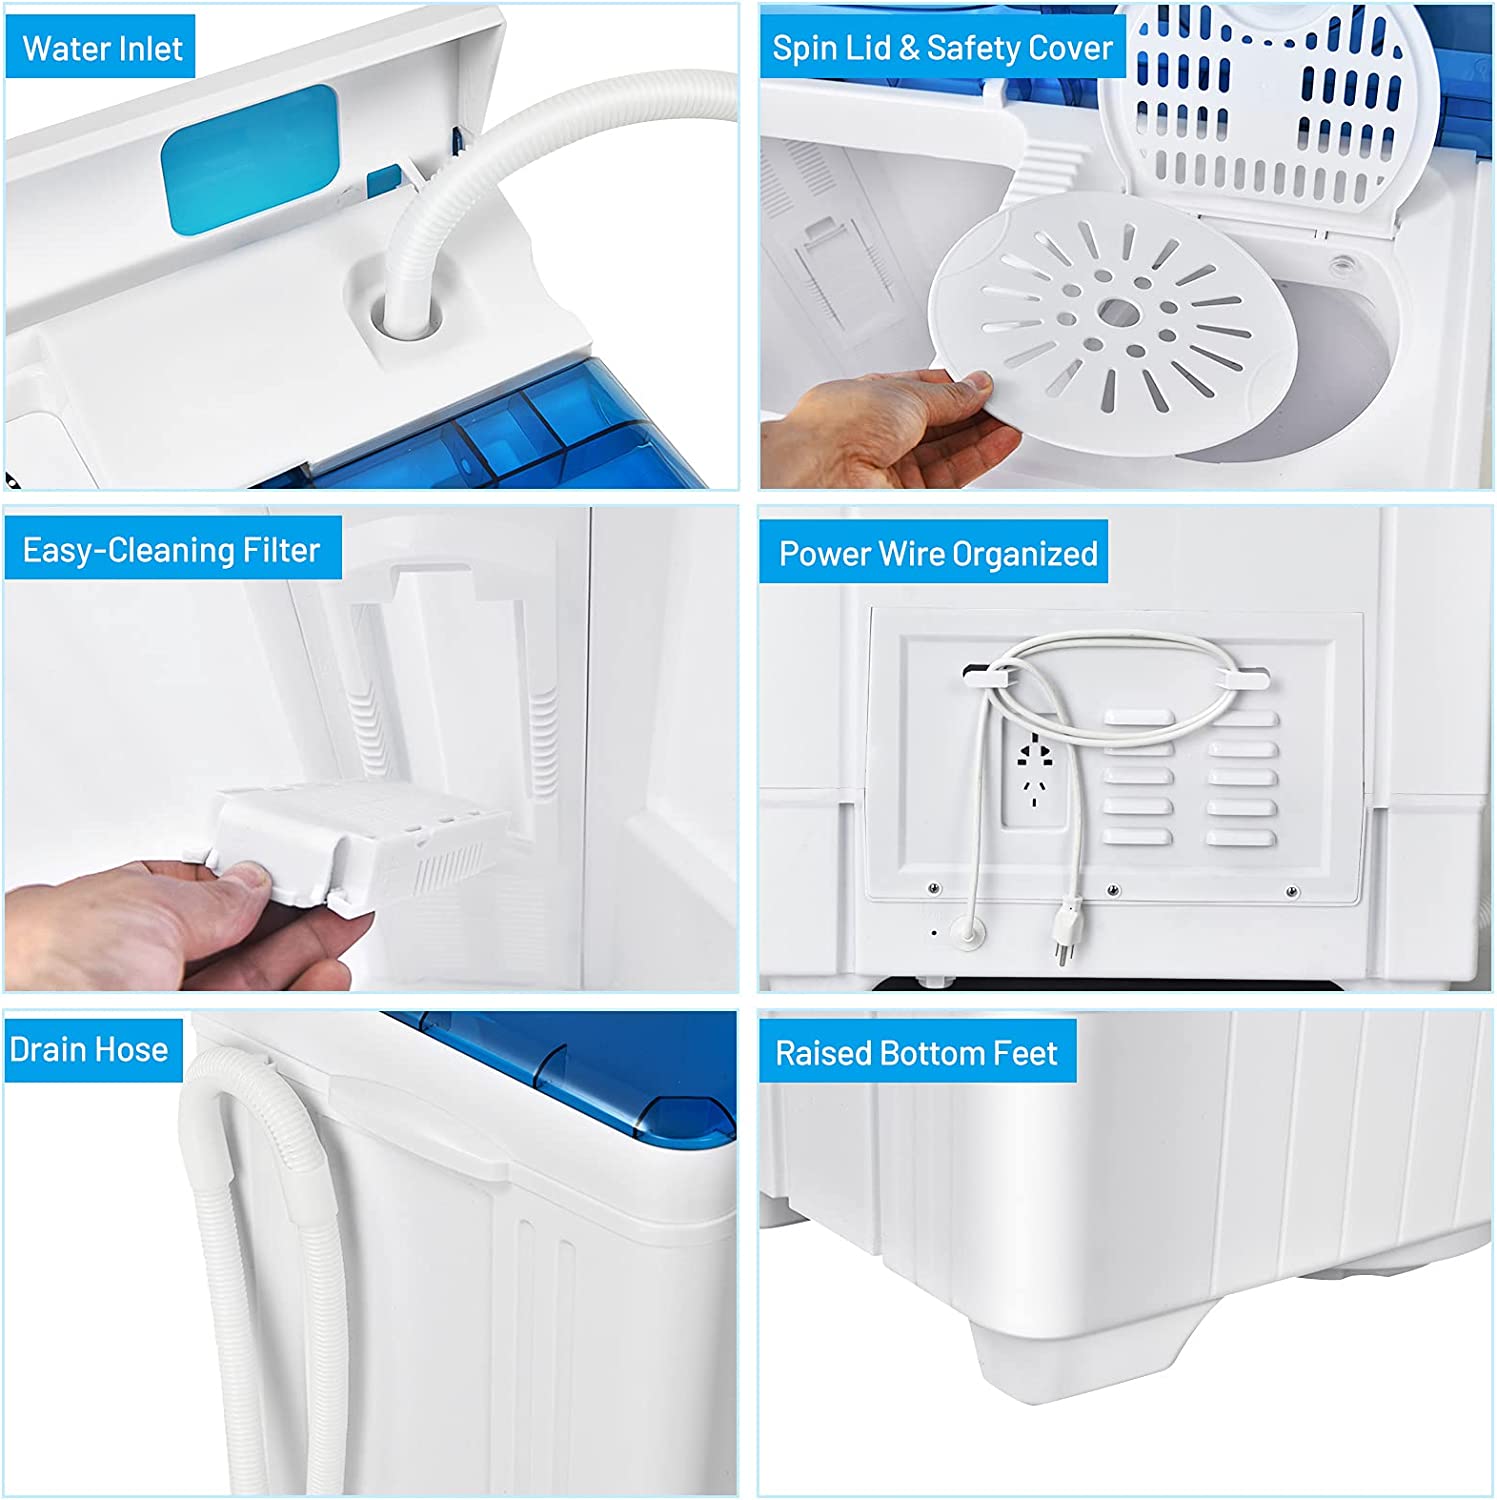 Chairliving Portable Semi-automatic Twin Tub Washing Machine 26lbs Compact Laundry Washer with Spin Dryer and Built-in Drain Pump for Dorm RV